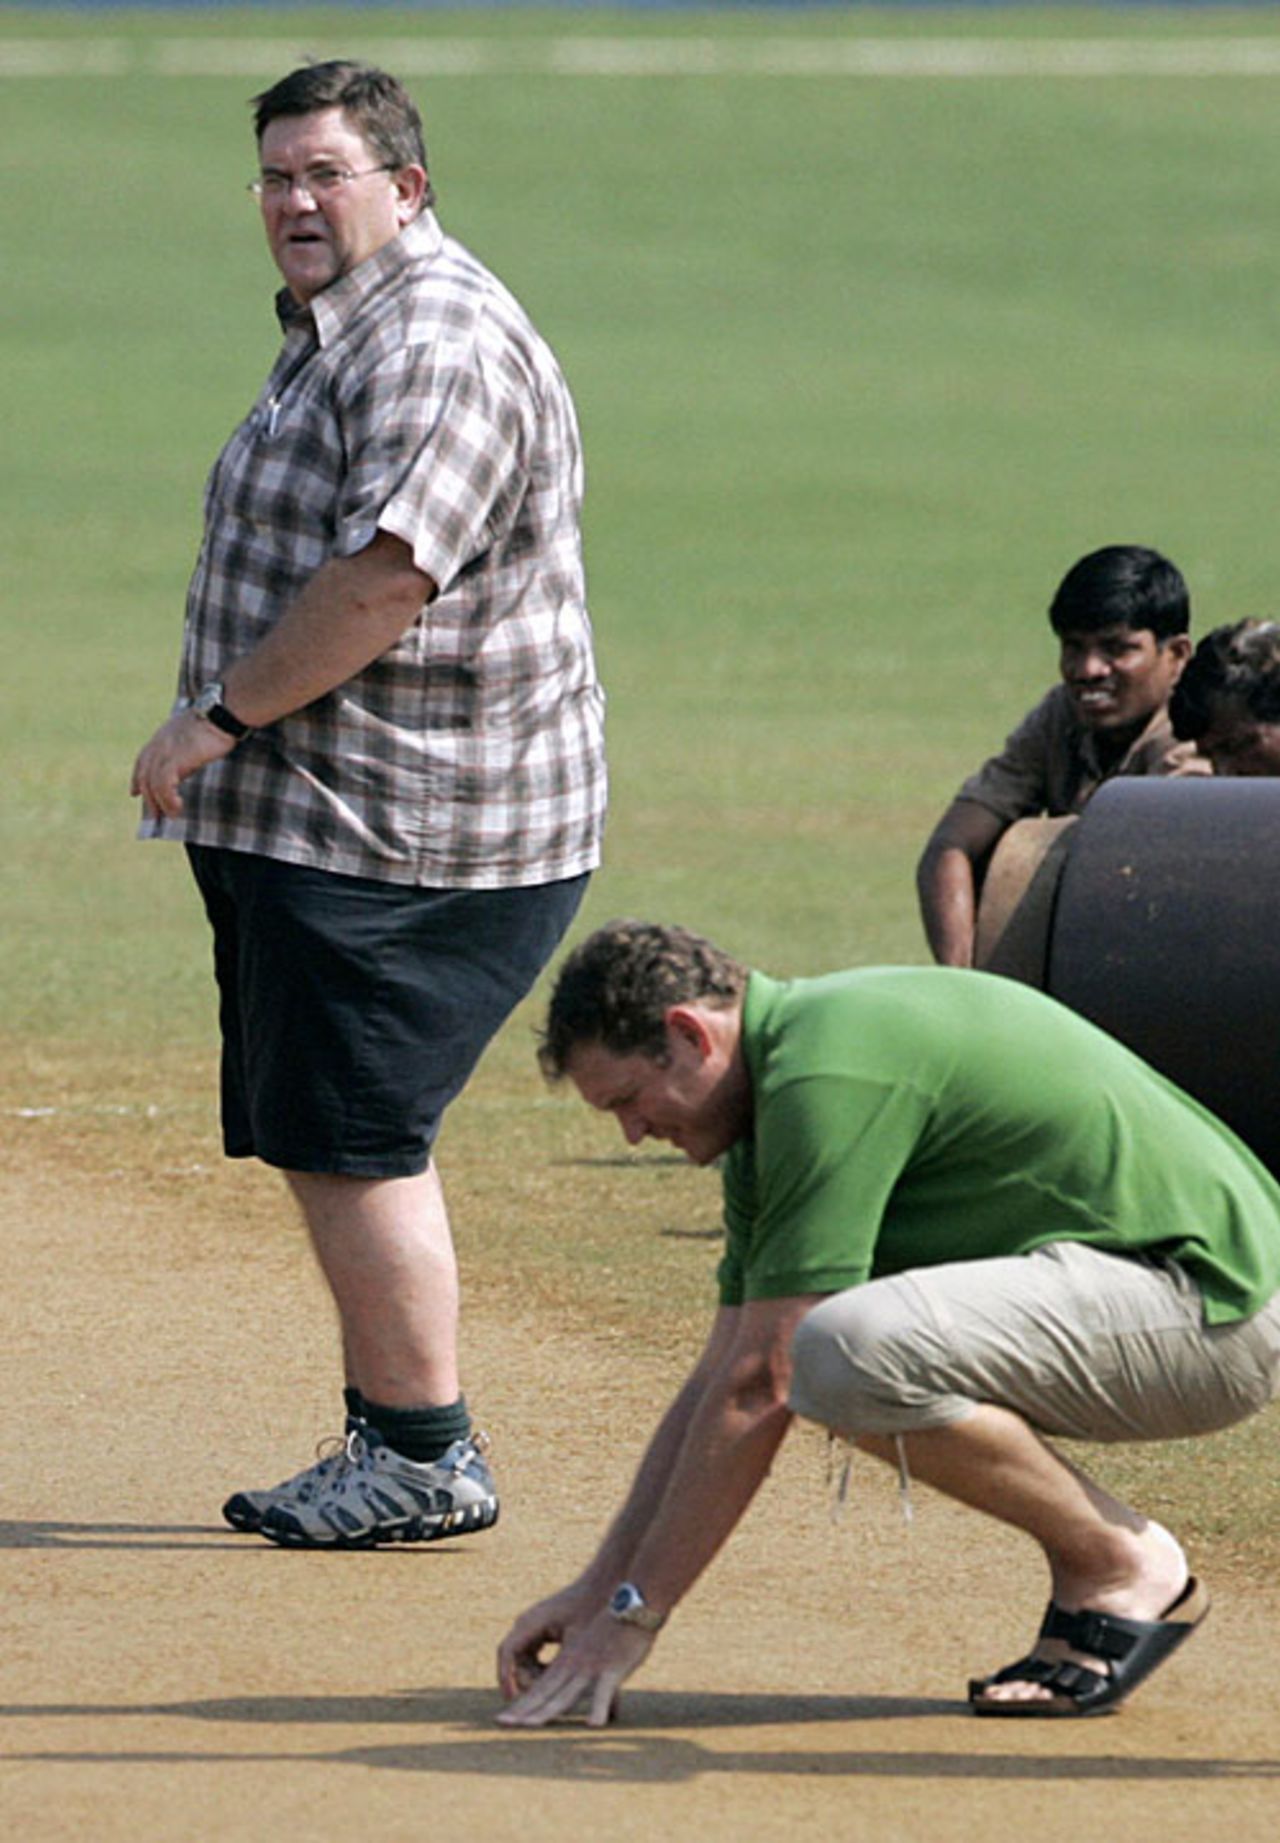 Tom Moody inspects the pitch while ICC grounds consultant Andy Atkinson looks on, Sri Lanka v New Zealand, 5th match, Champions Trophy, Mumbai, October 20, 2006